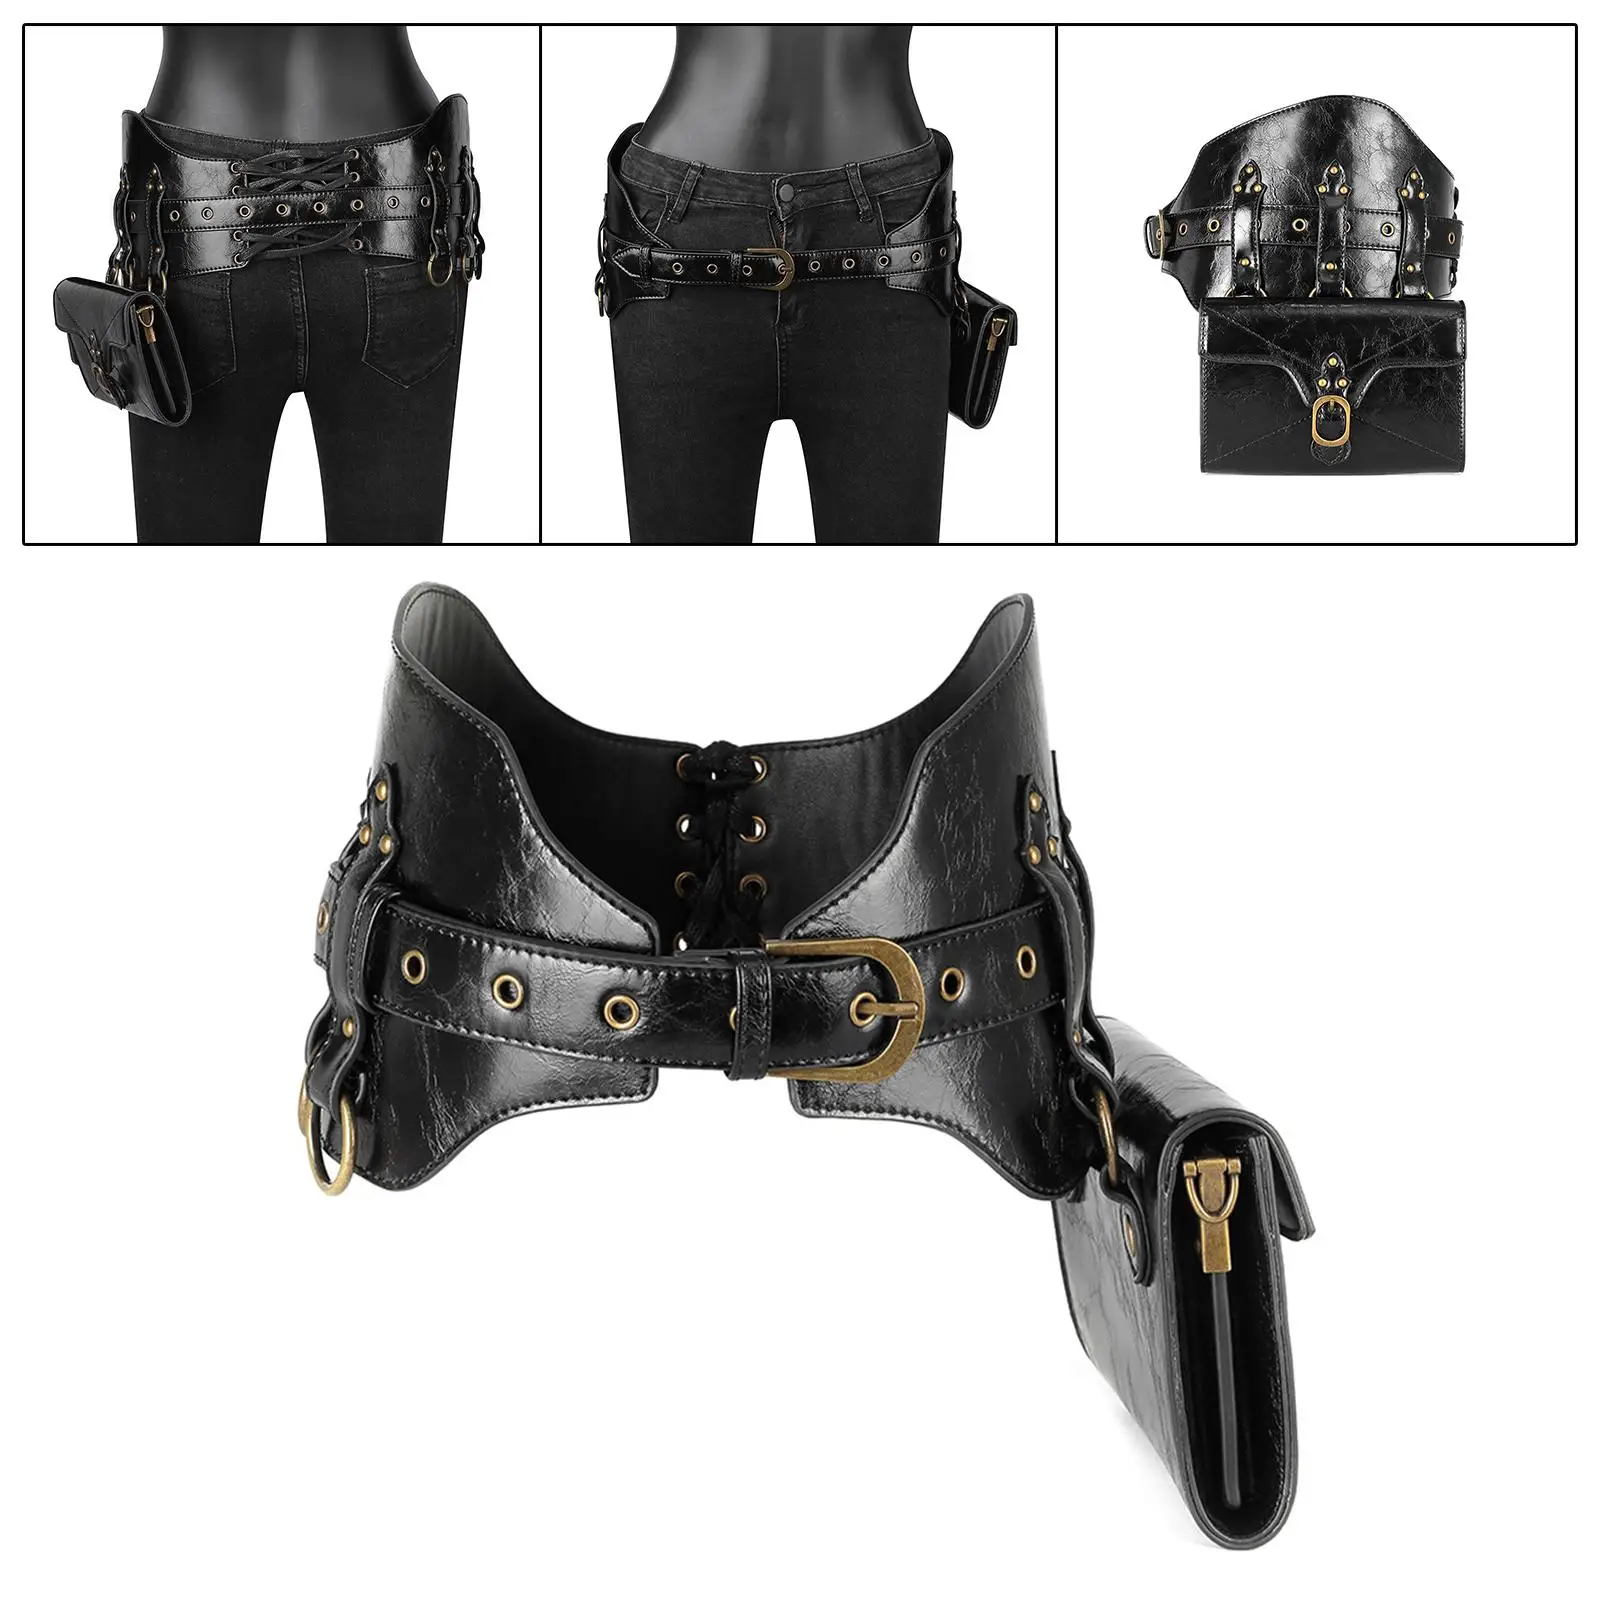 Steampunk Waist Pack Vintage Style Durable Portable Leg Purse Steampunk Waist Belt Bag for Vacations Street Shopping Gift Dating